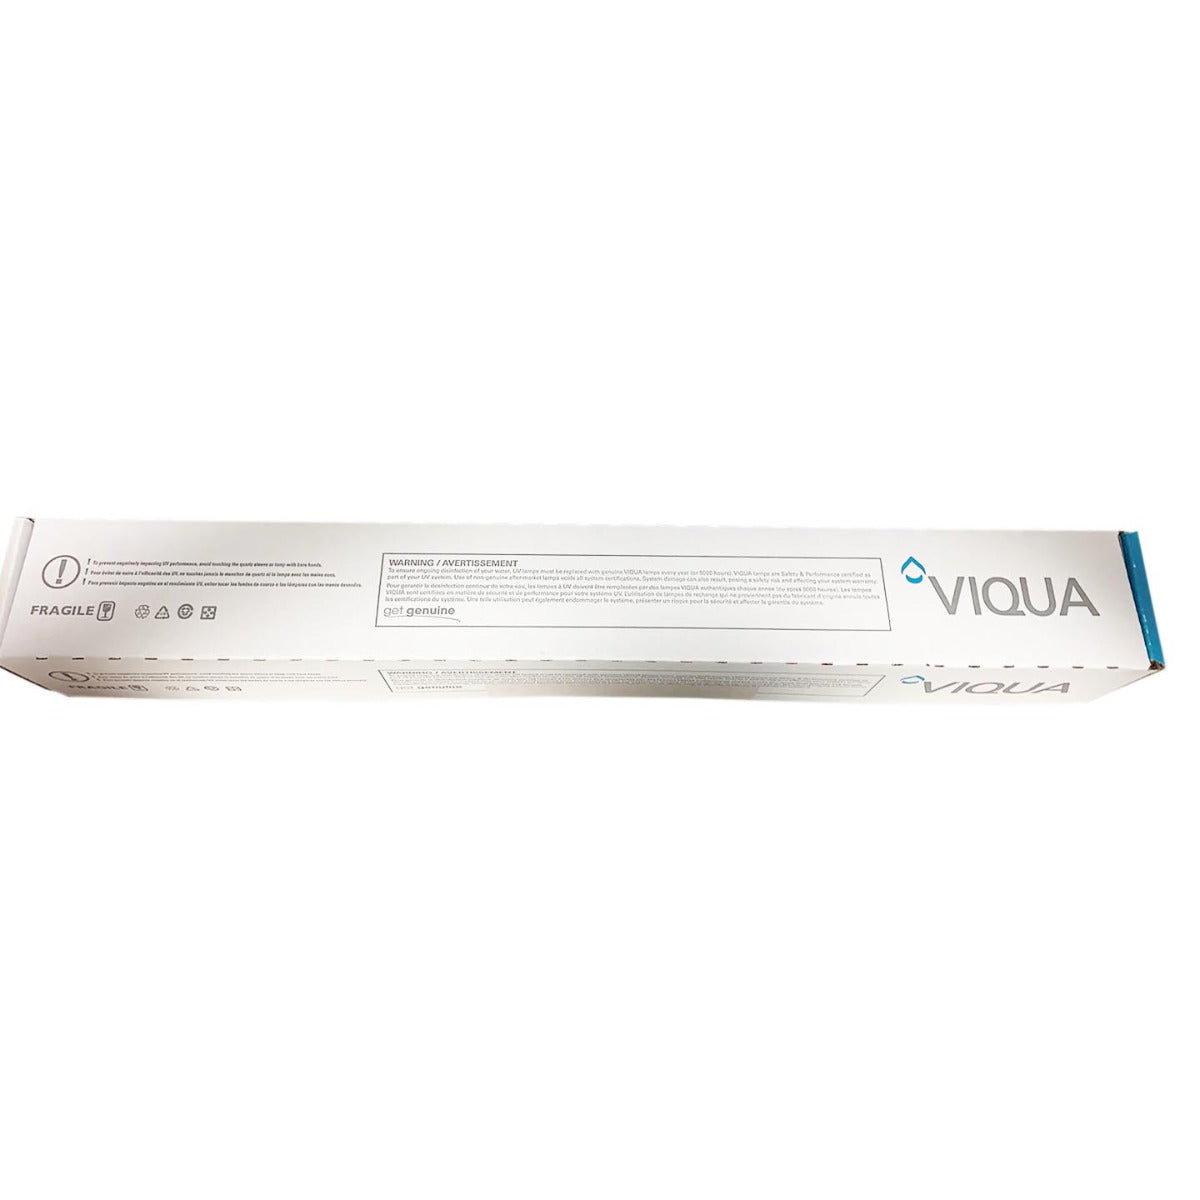 S463RL Water Disinfection System UV Lamp by Viqua